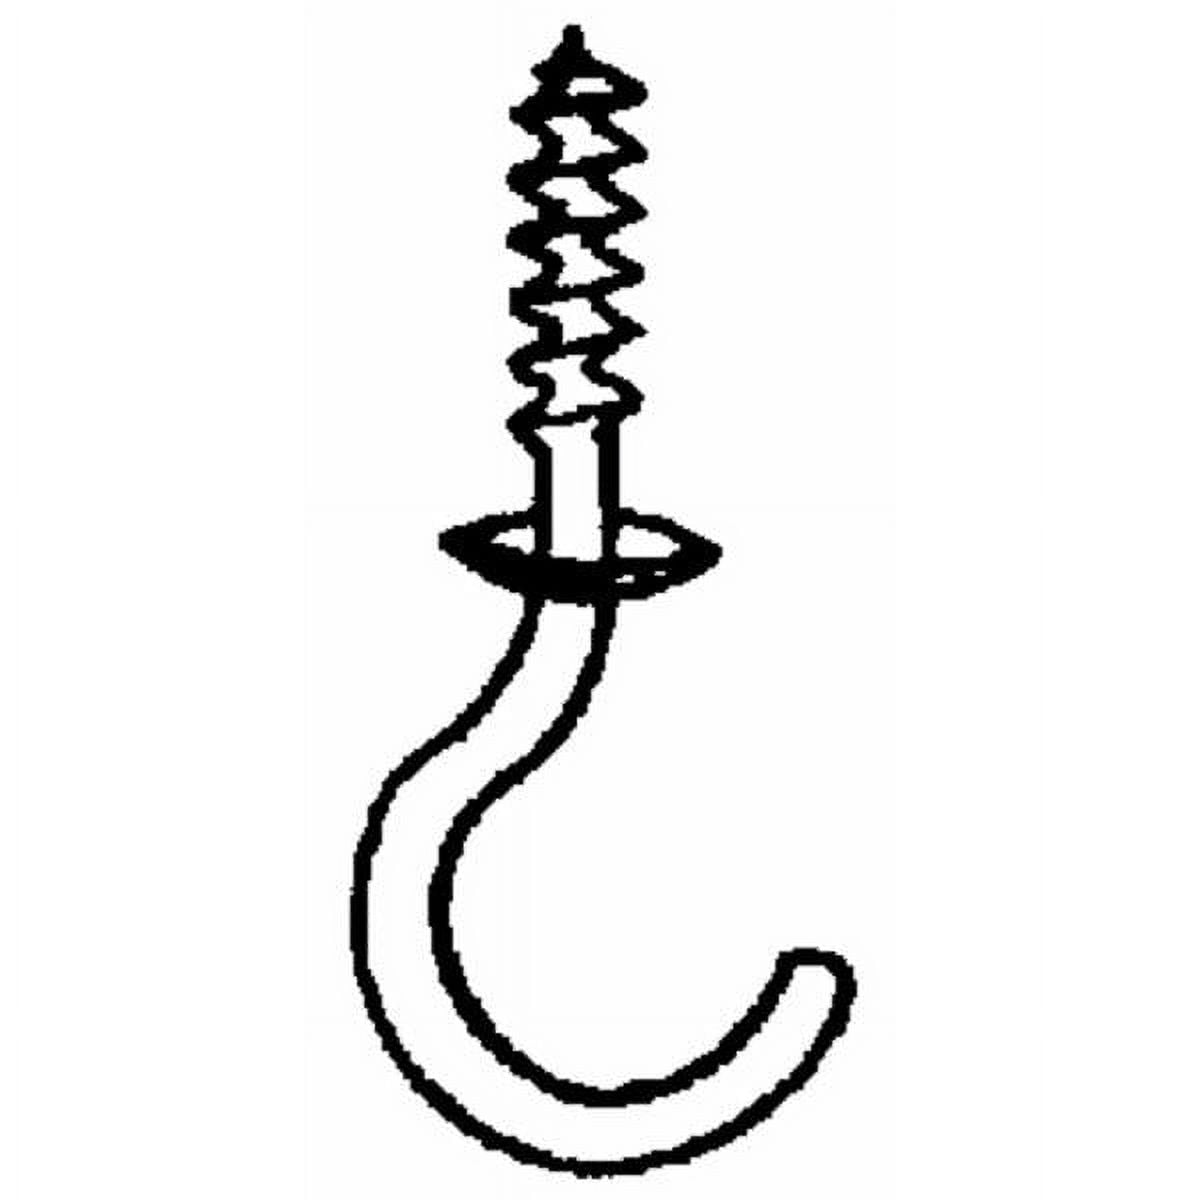 National Hardware N119-727 Cup Hook, 0.44 in L Thread, Brass - Fasteners